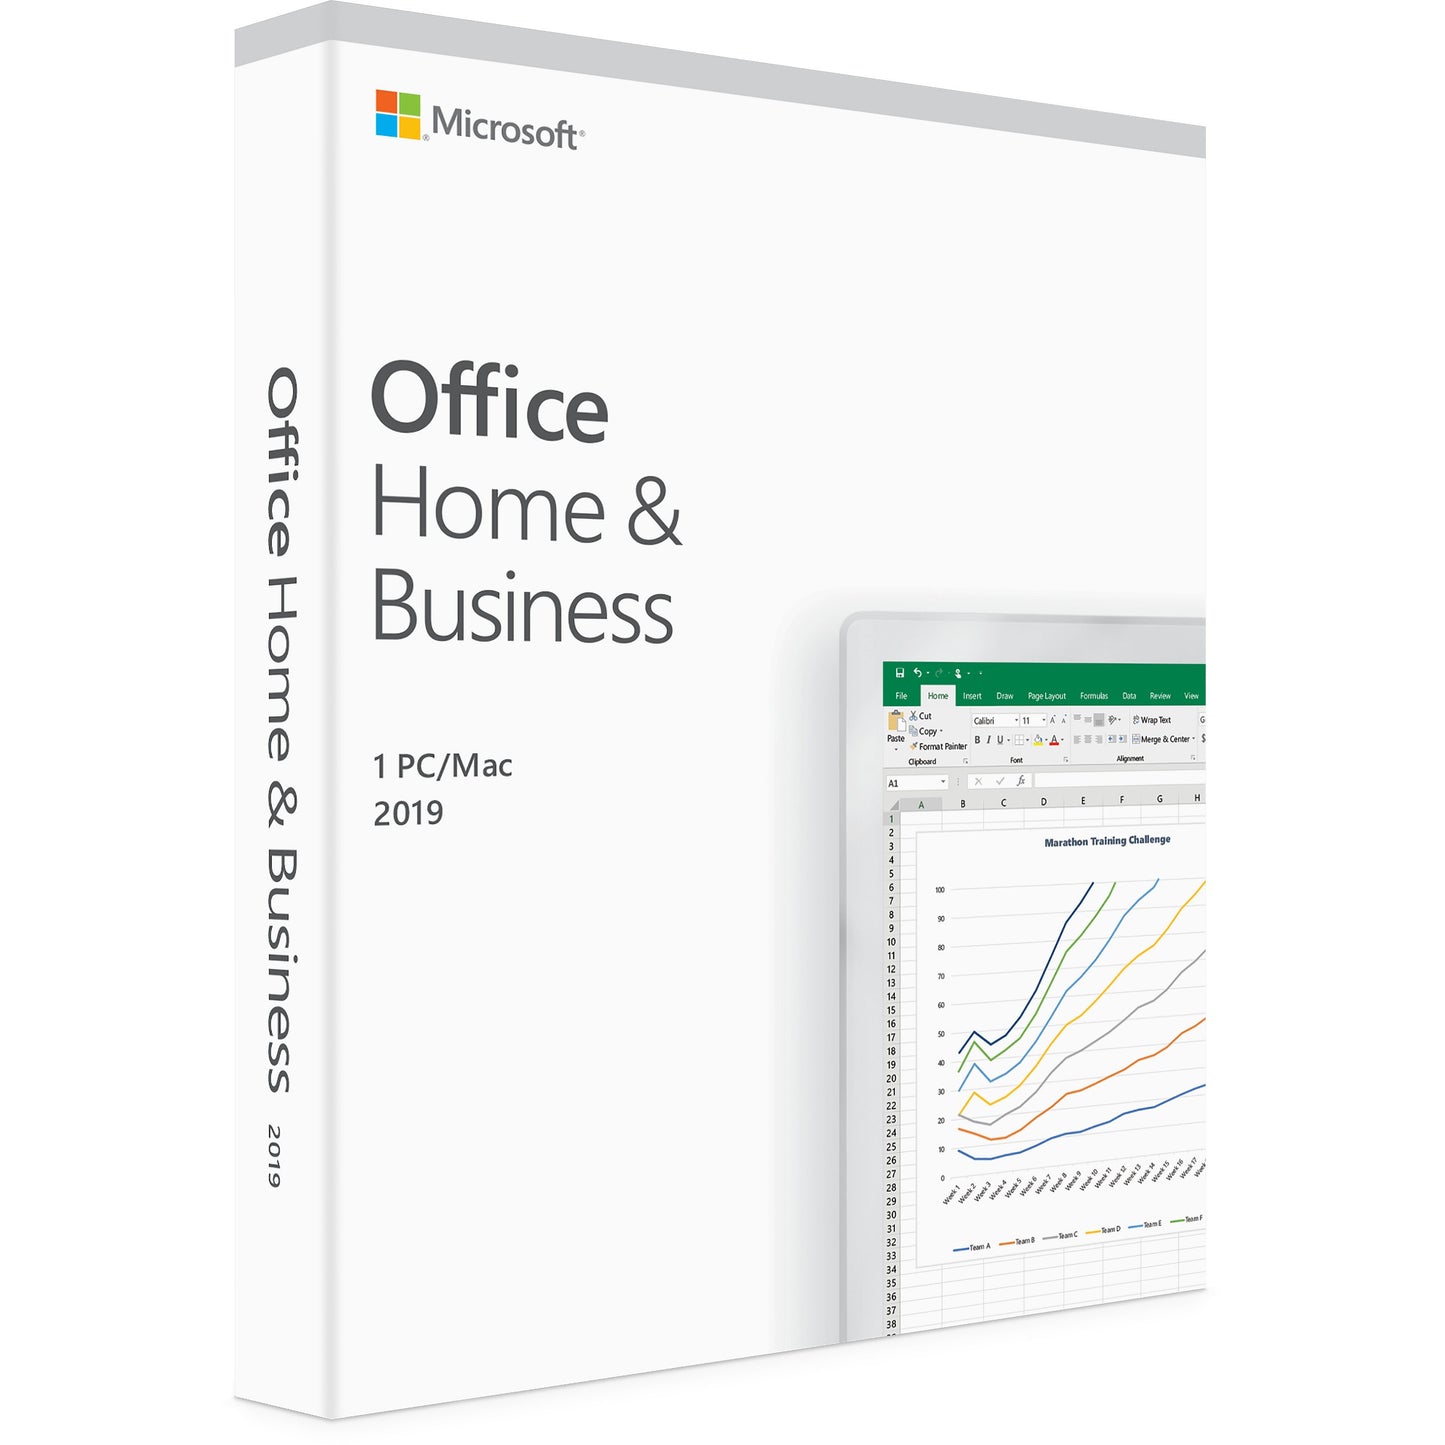 Microsoft Office Home & Business 2019 - 1 user